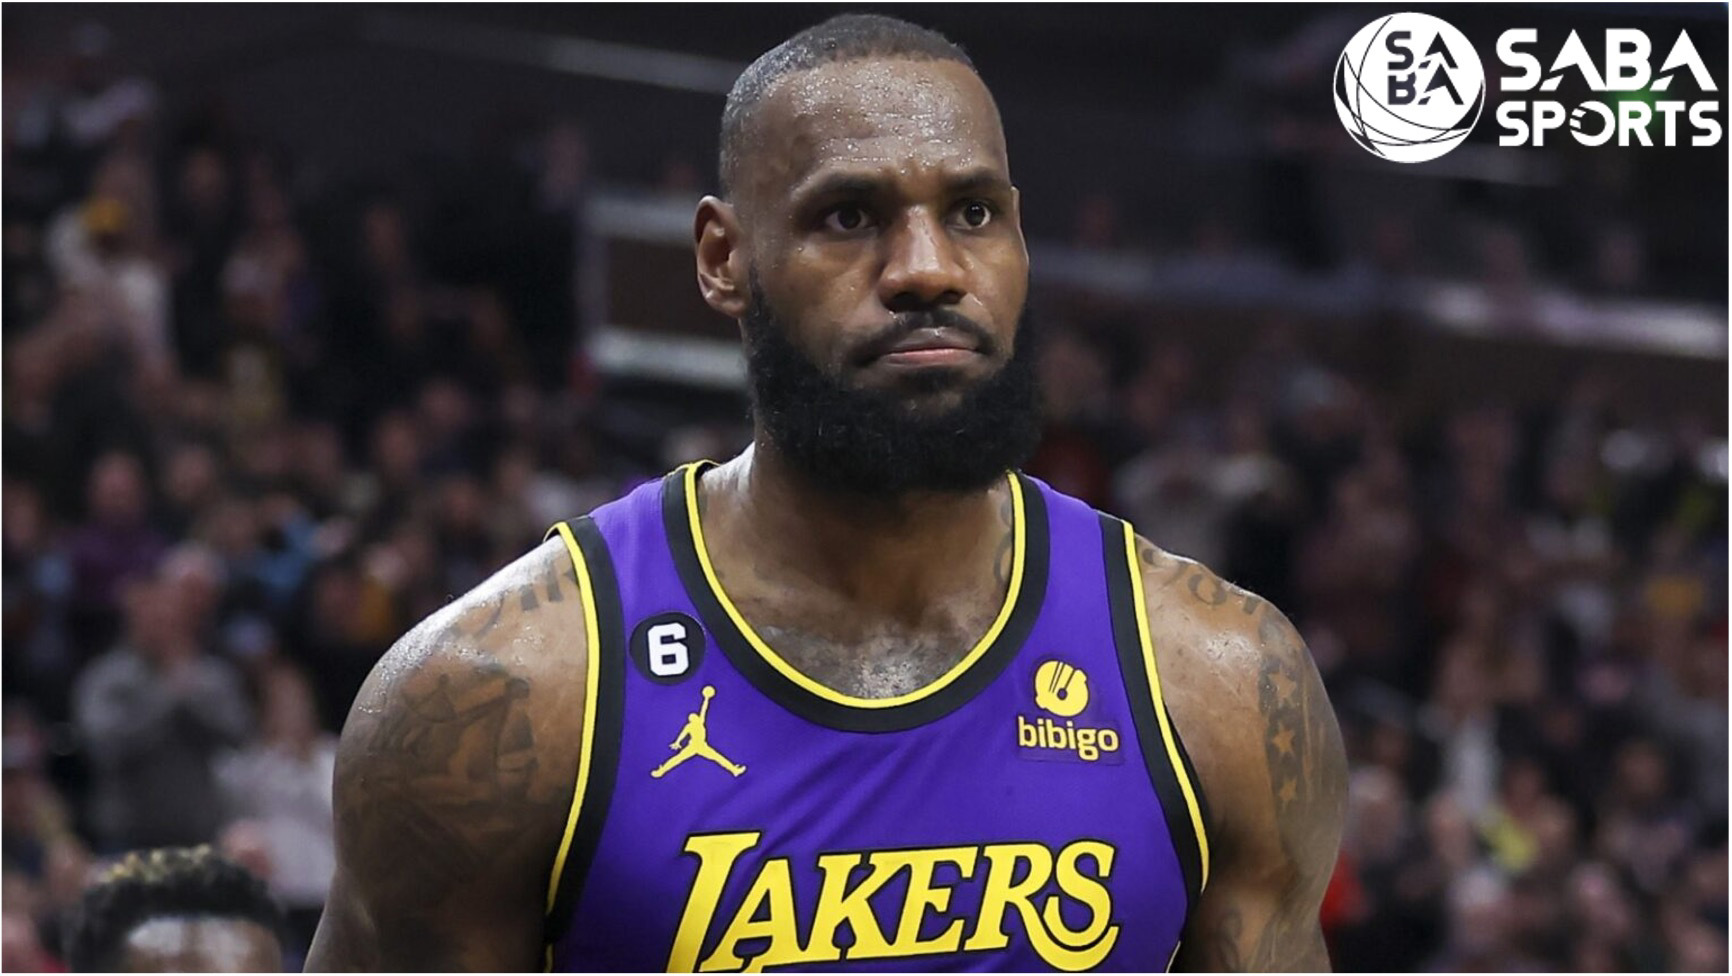 The road to back-to-back starts in about a week - LeBron James makes bold  claim as LA Lakers unveil banner No. 17